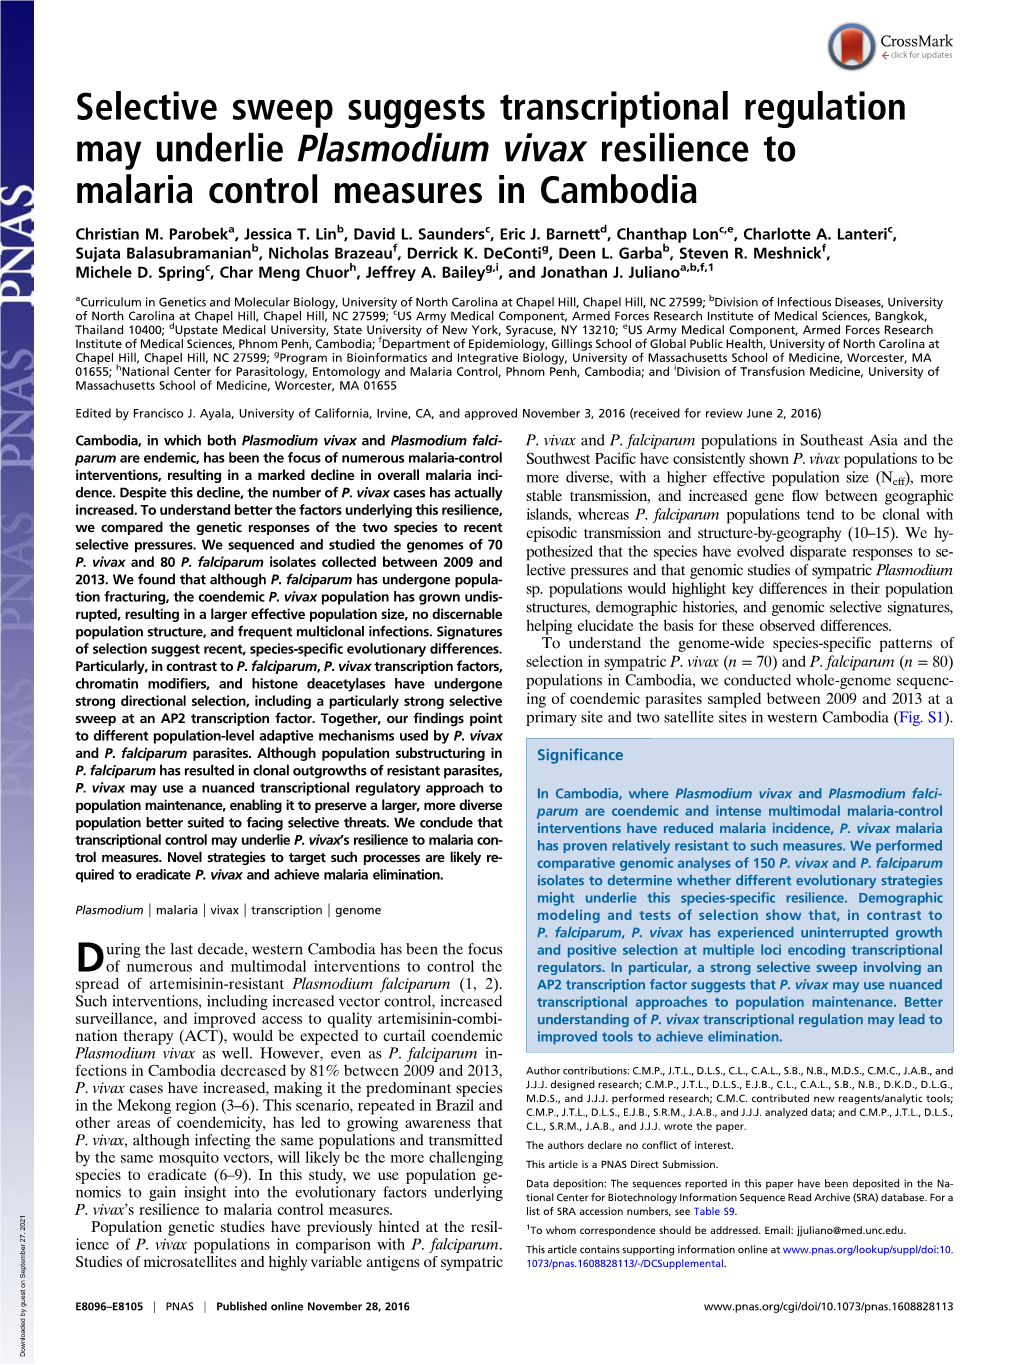 Selective Sweep Suggests Transcriptional Regulation May Underlie Plasmodium Vivax Resilience to Malaria Control Measures in Cambodia